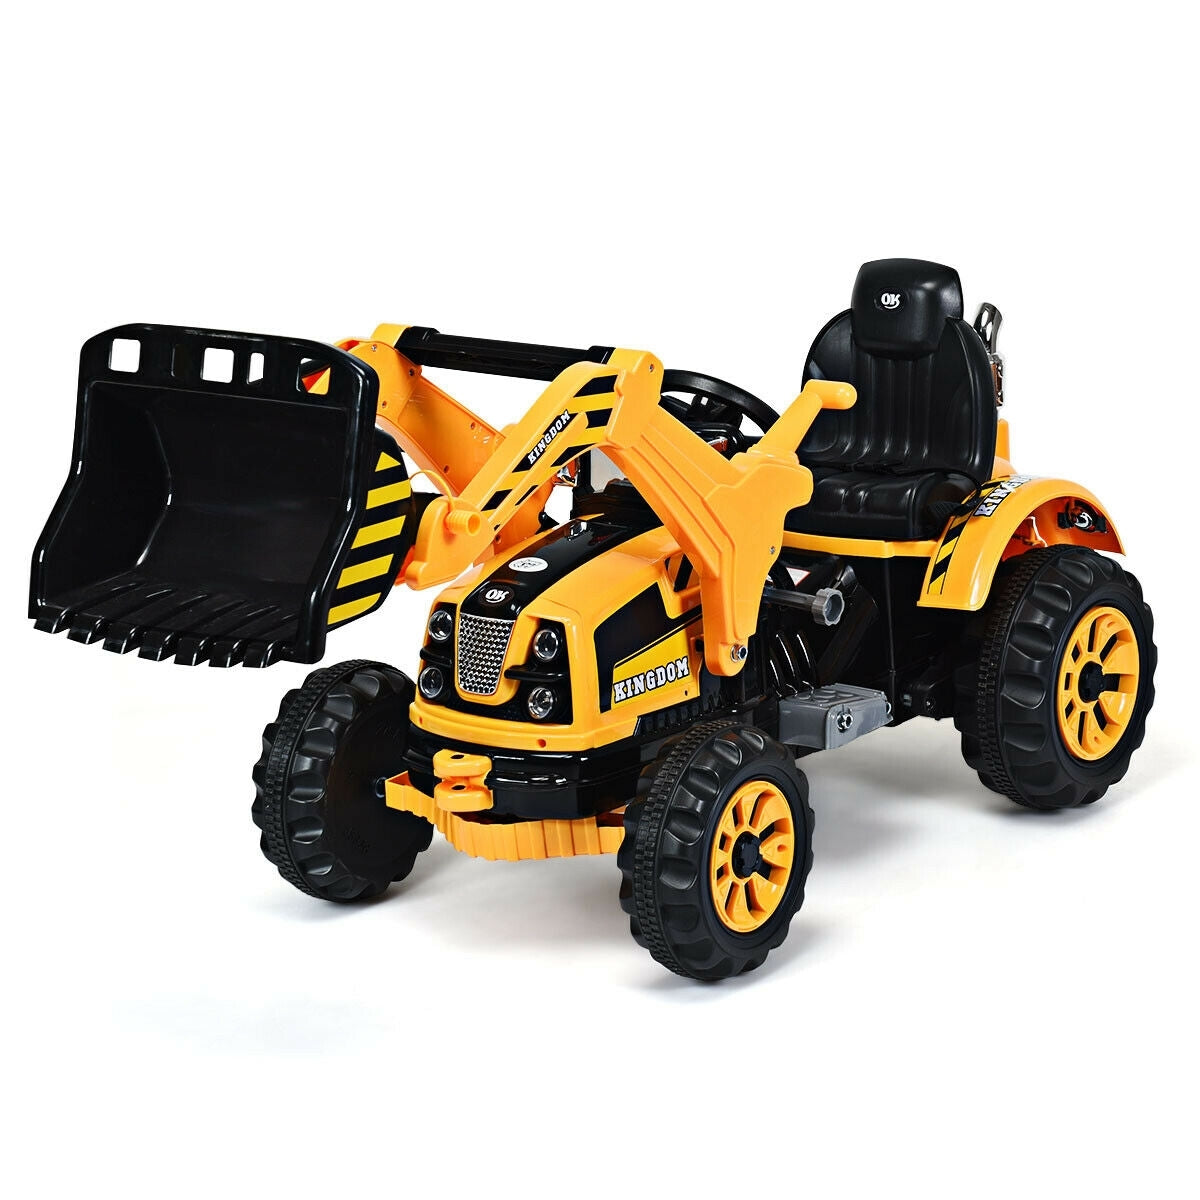 12 V Battery Powered Kids Ride on Dumper Truck-Yellow. - Color: Yellow